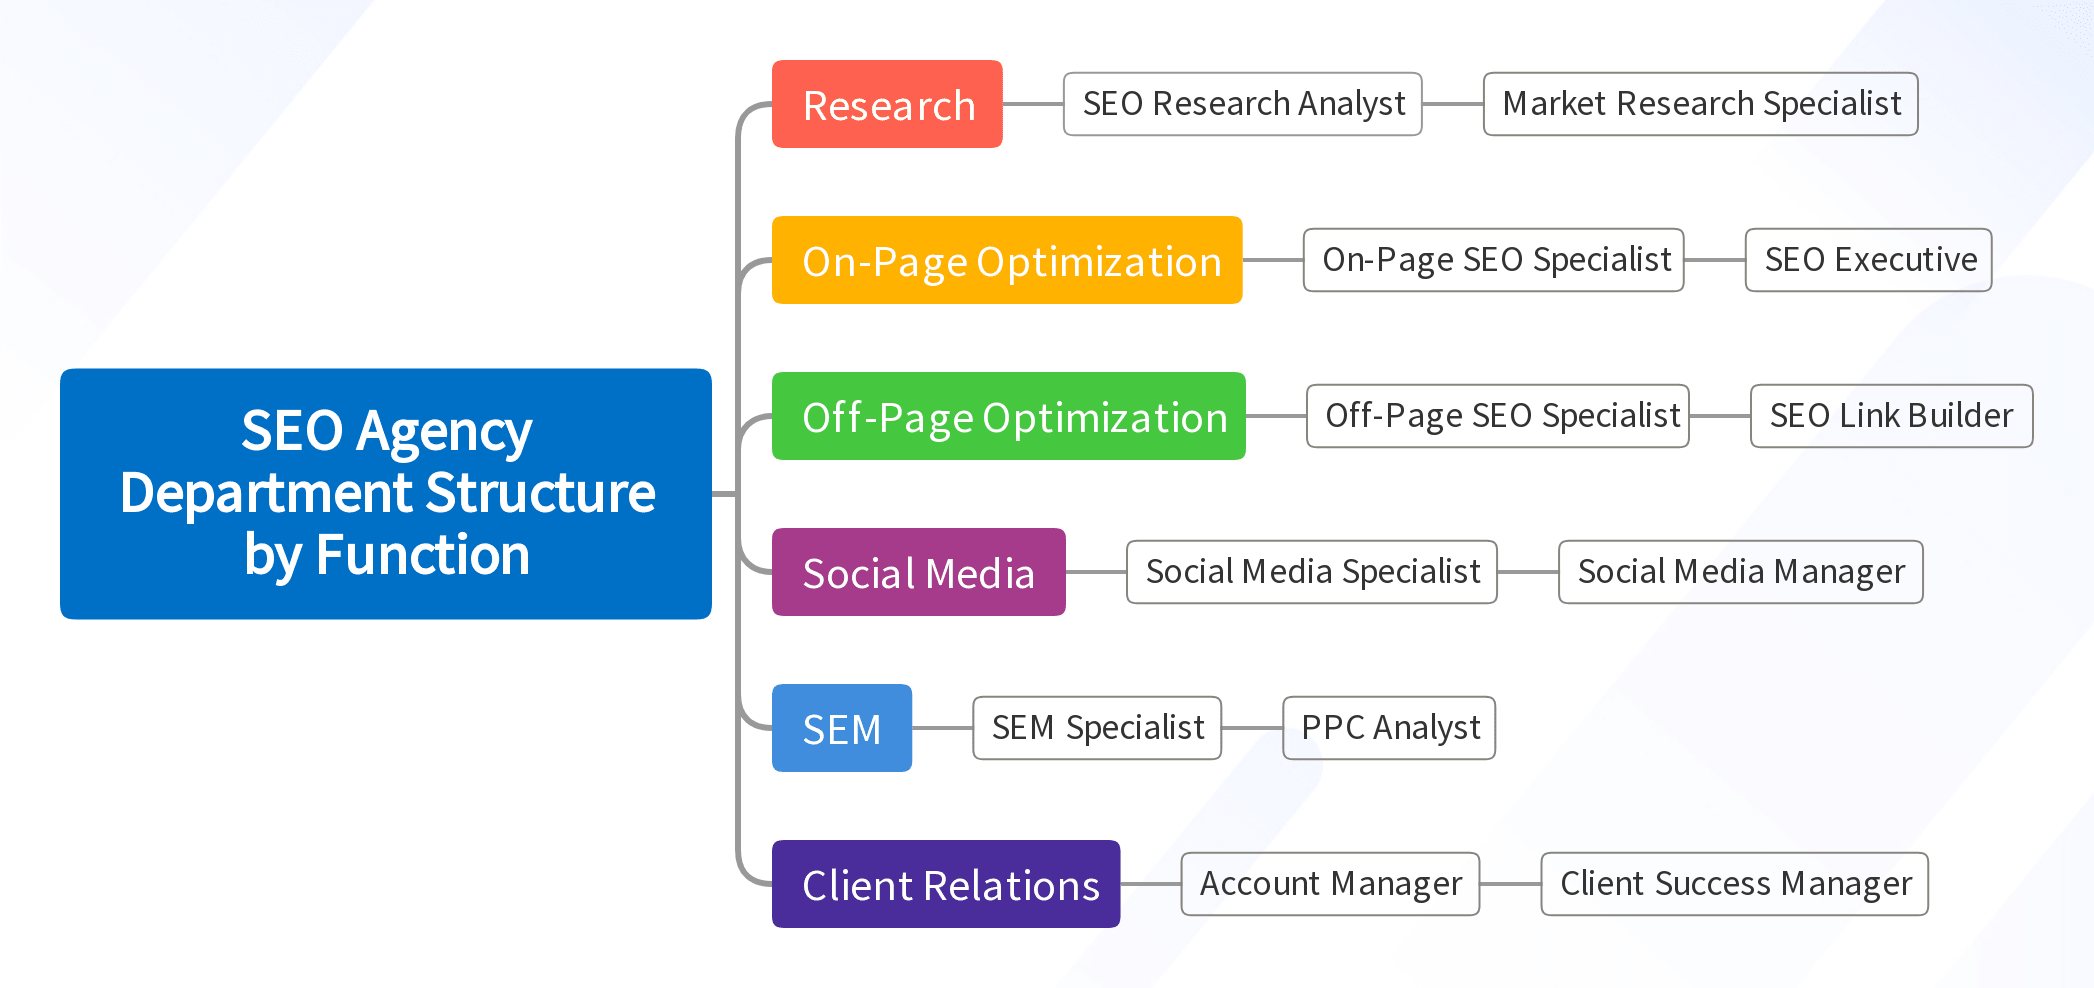 SEO Agency Department Structure by Function